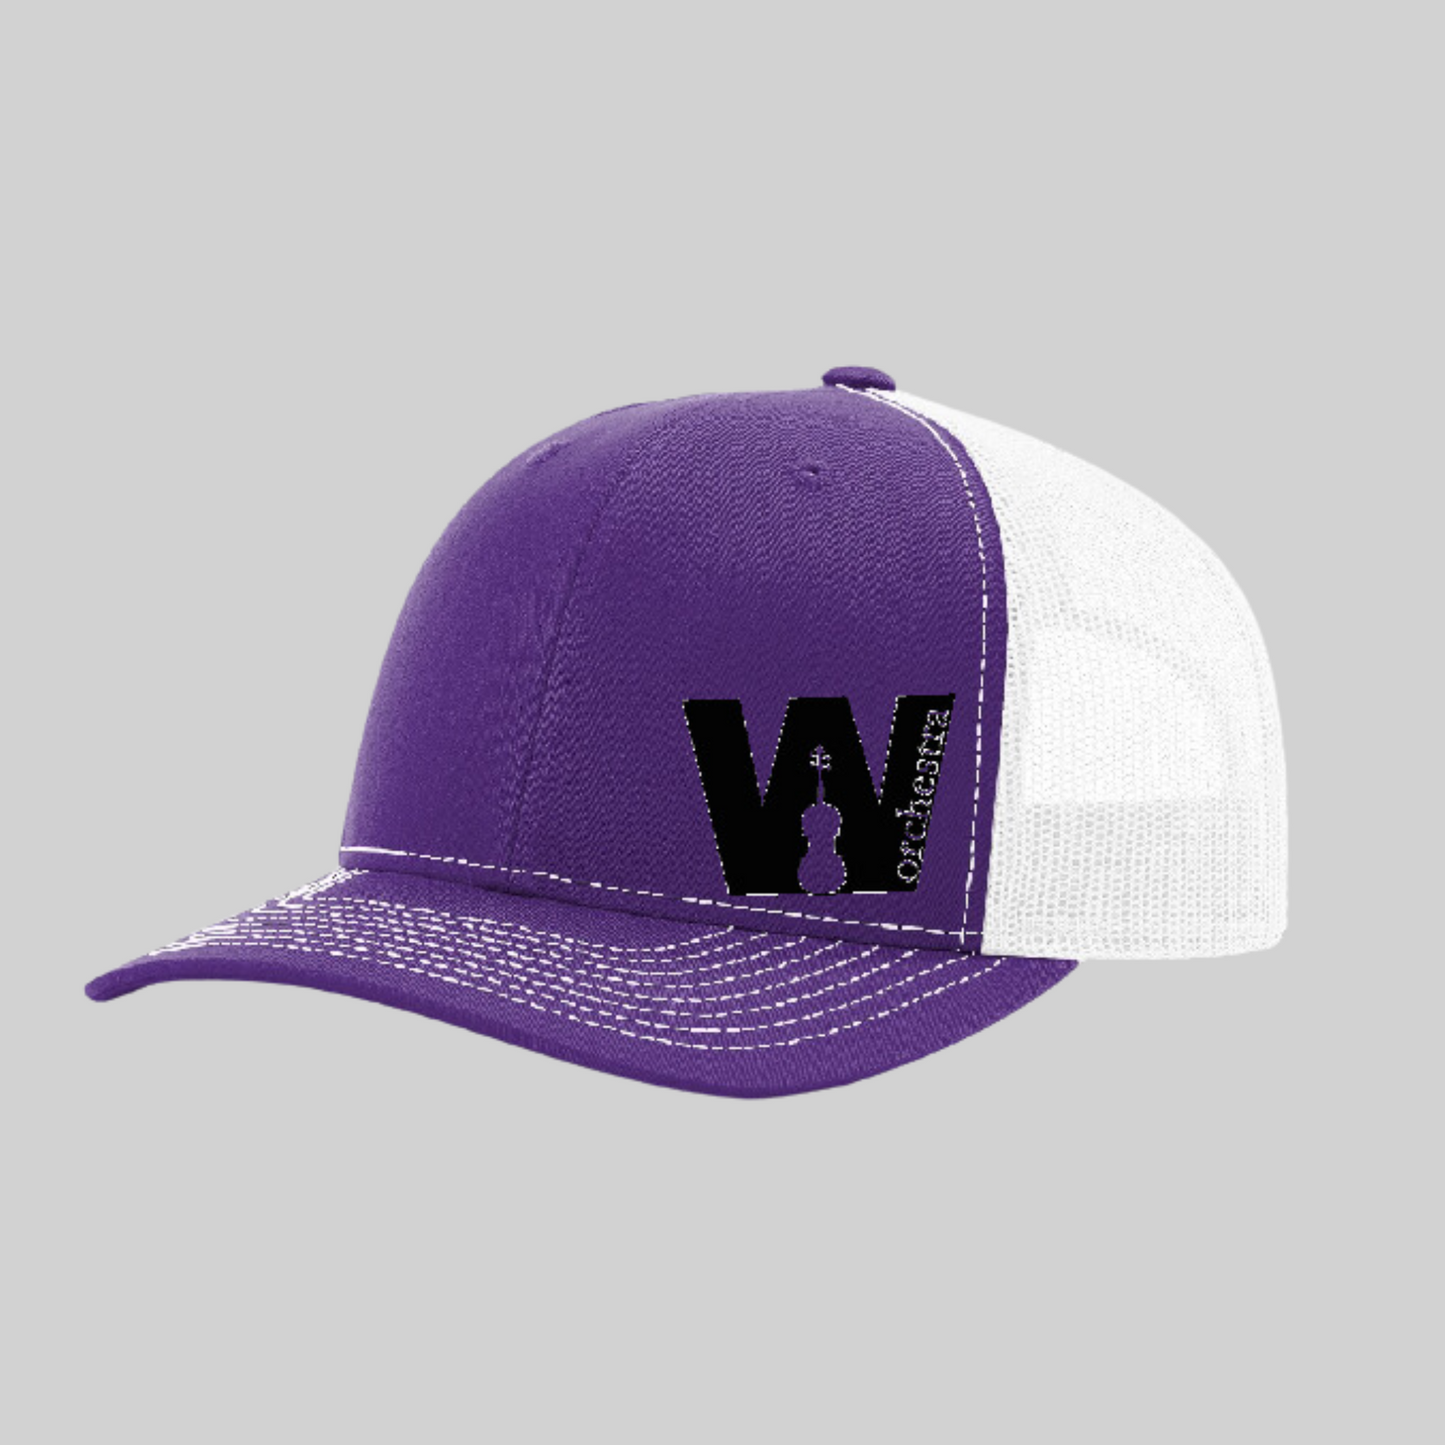 Wilson Middle School Orchestra Hat